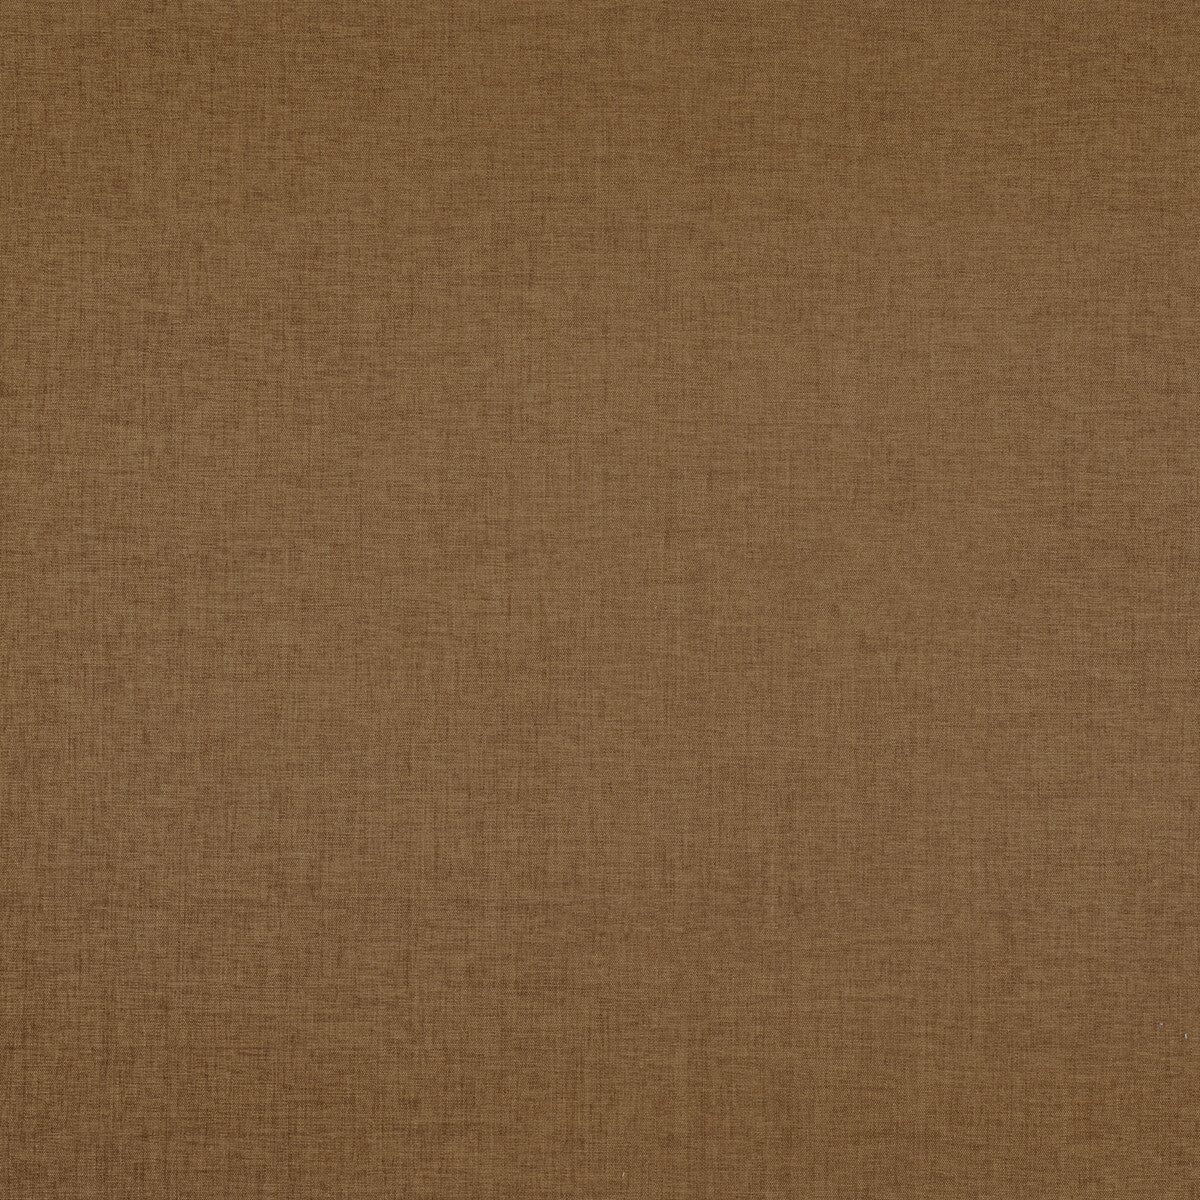 Kravet Smart fabric in 36095-6 color - pattern 36095.6.0 - by Kravet Smart in the Eco-Friendly Chenille collection